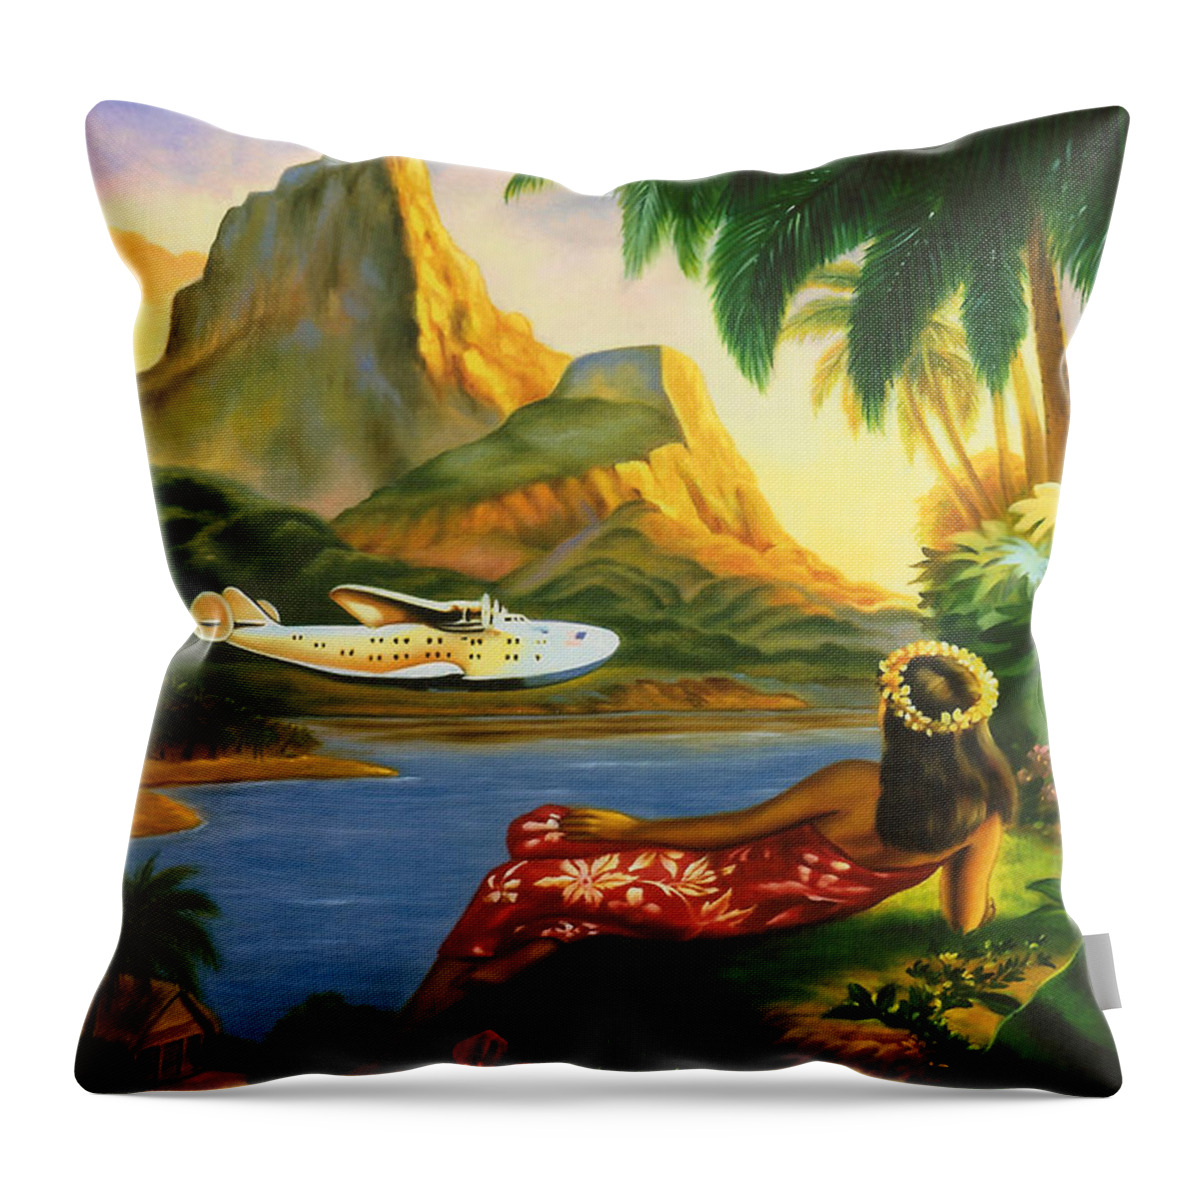 Background Throw Pillow featuring the digital art South Sea Isles by Georgia Fowler